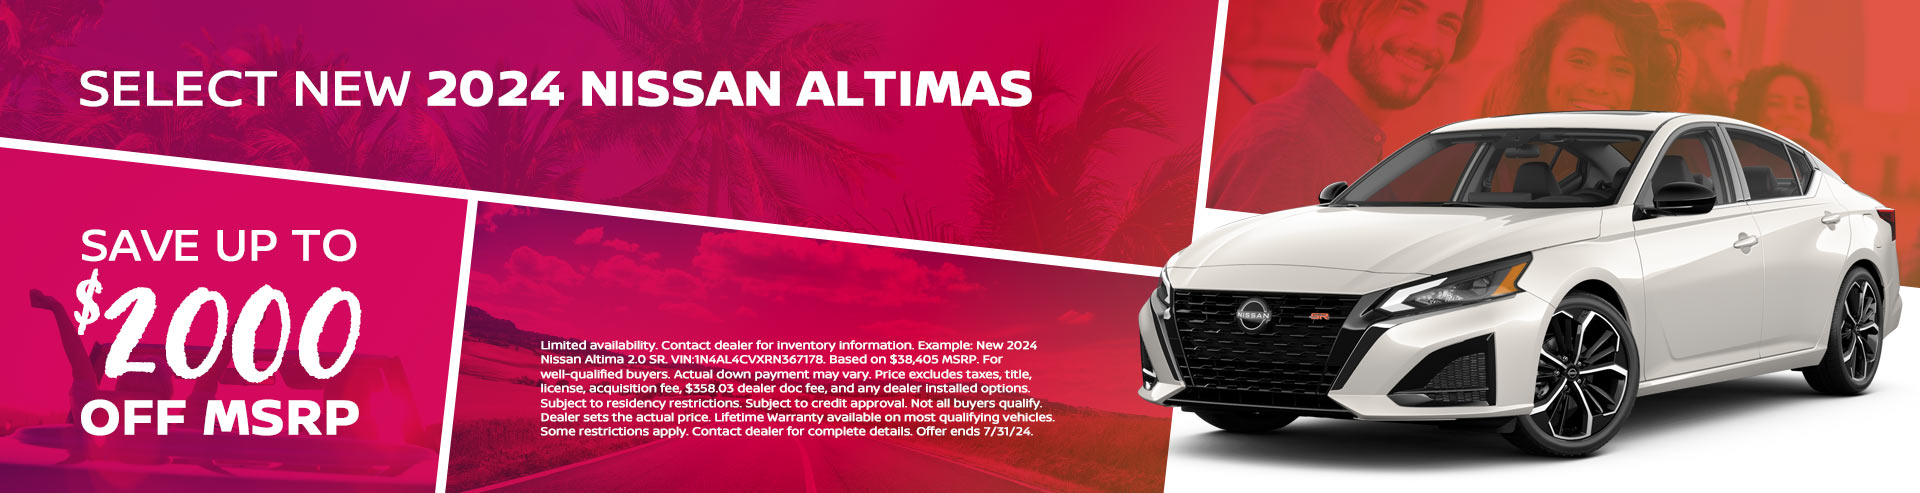 Save up to $2,000 off MSRP on select New 2024 Nissan Altimas